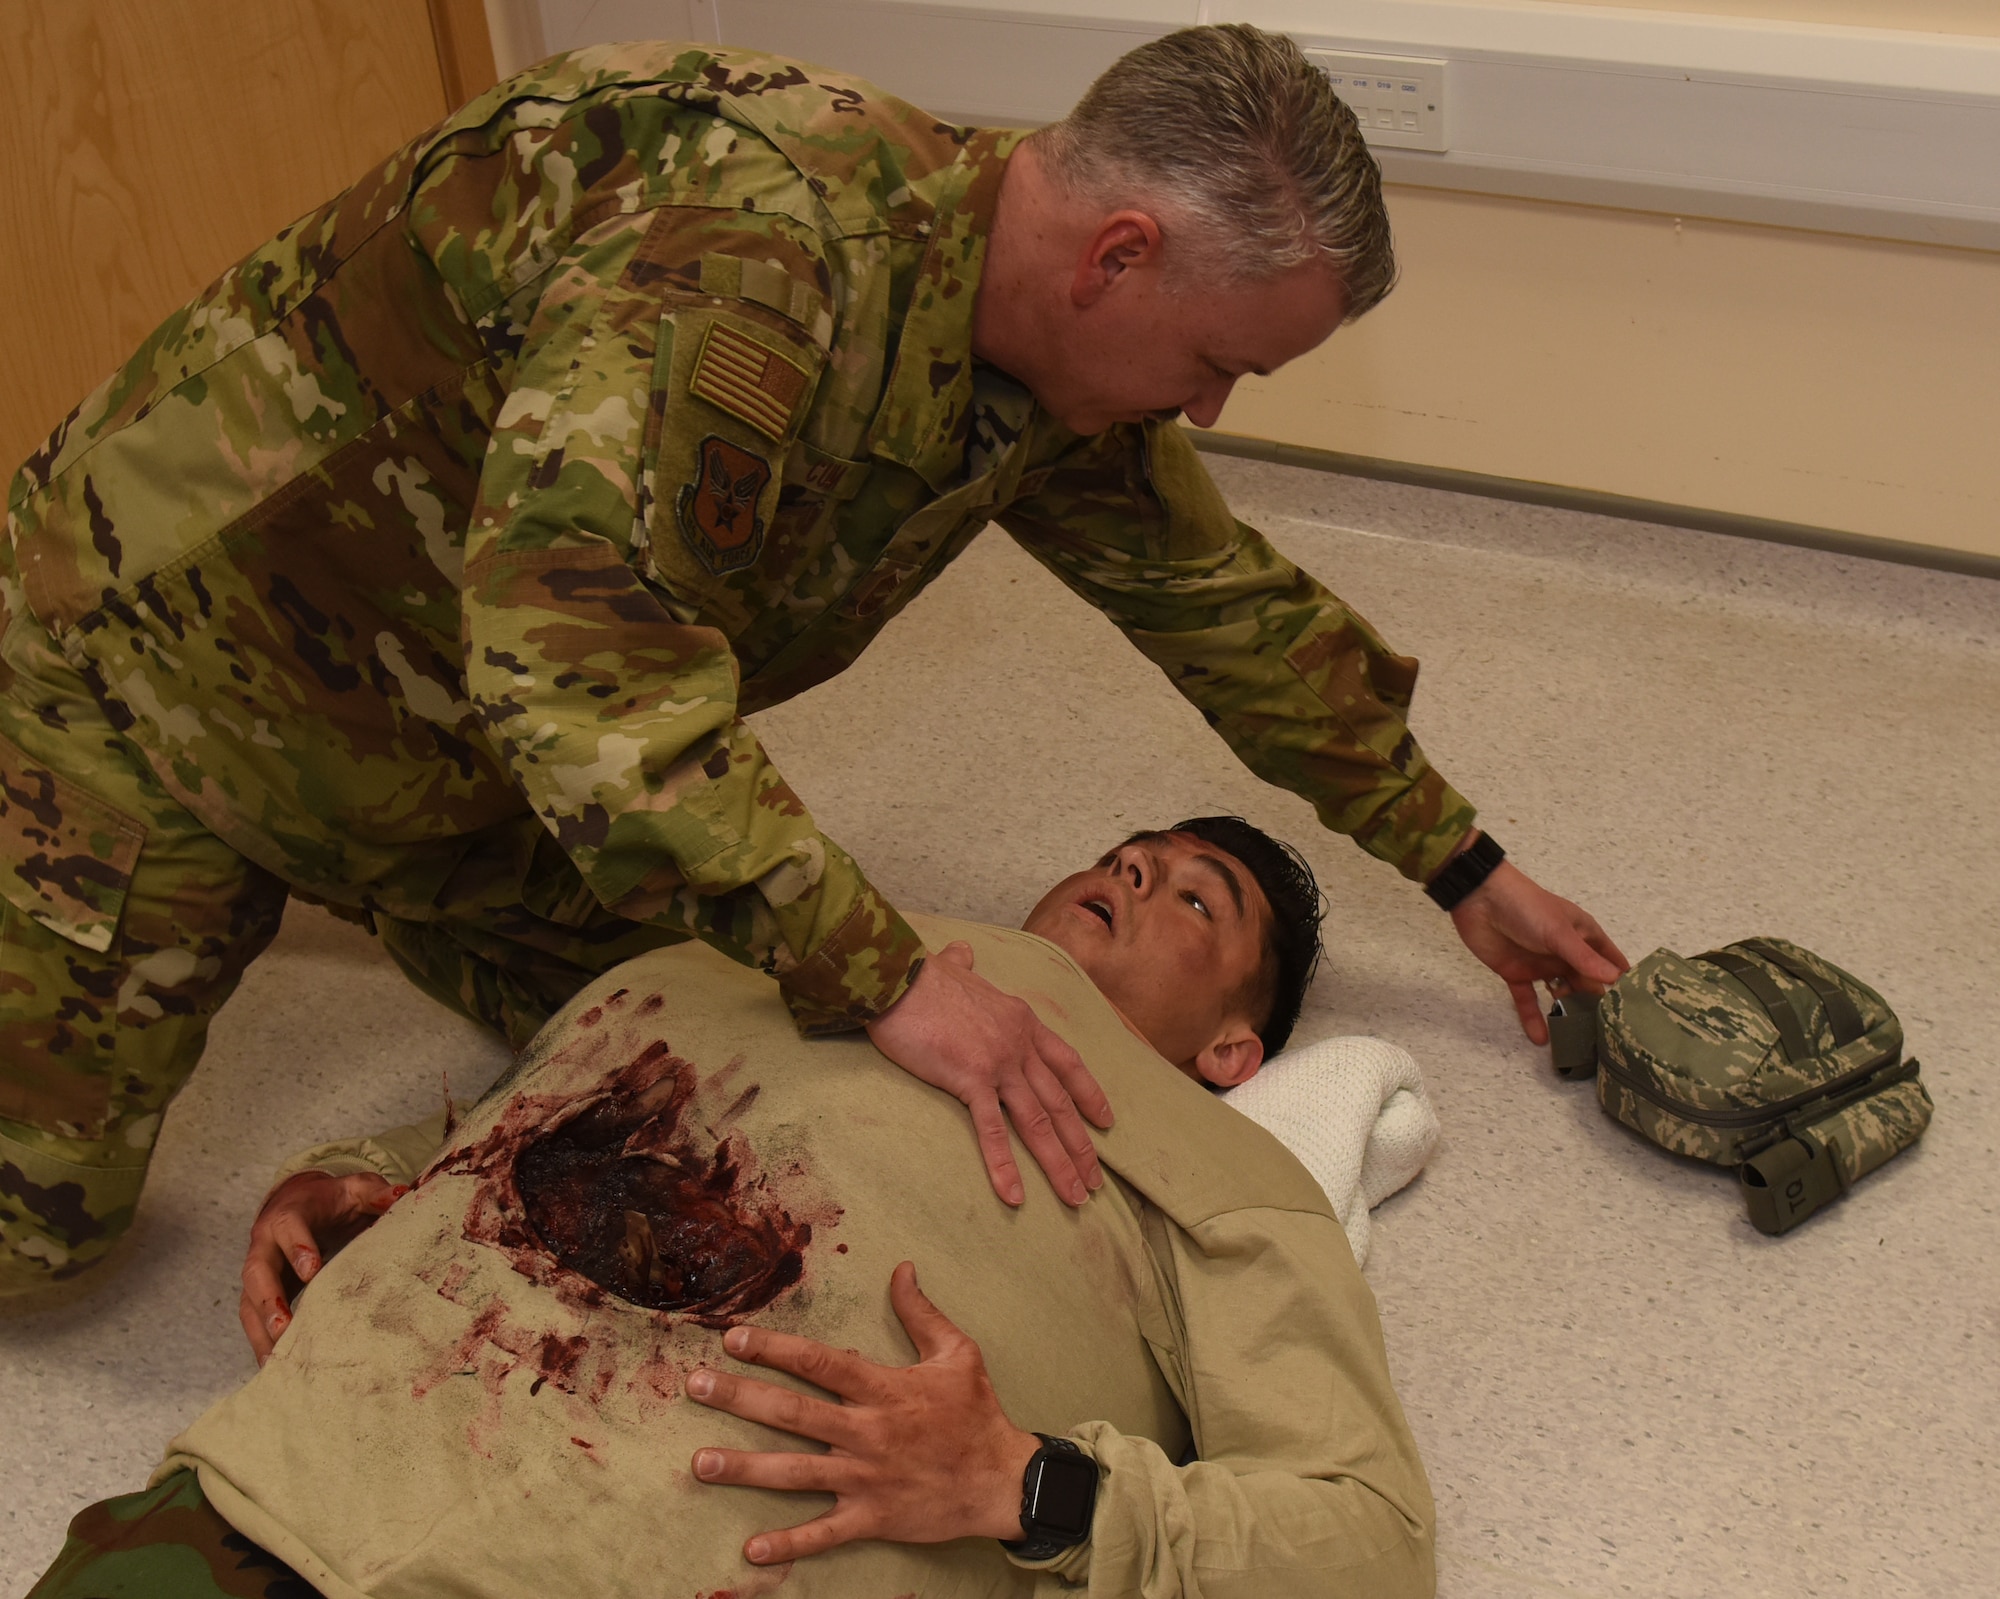 Chief Master Sgt. Steven Cum, U.S. Air Force chief of medical enlisted force and enlisted corps chief, responds to a simulation of an emergency situation at RAF Lakenheath, England, Feb. 28, 2019. The 48th Medical Group ensures the combat capabilities of U.S. military members across six locations within the United Kingdom through medical care and maintains Unites States Air Forces in Europe-Air Forces Africa’s largest hospital. (U.S. Air Force photo by Airman 1st Class Madeline Herzog)